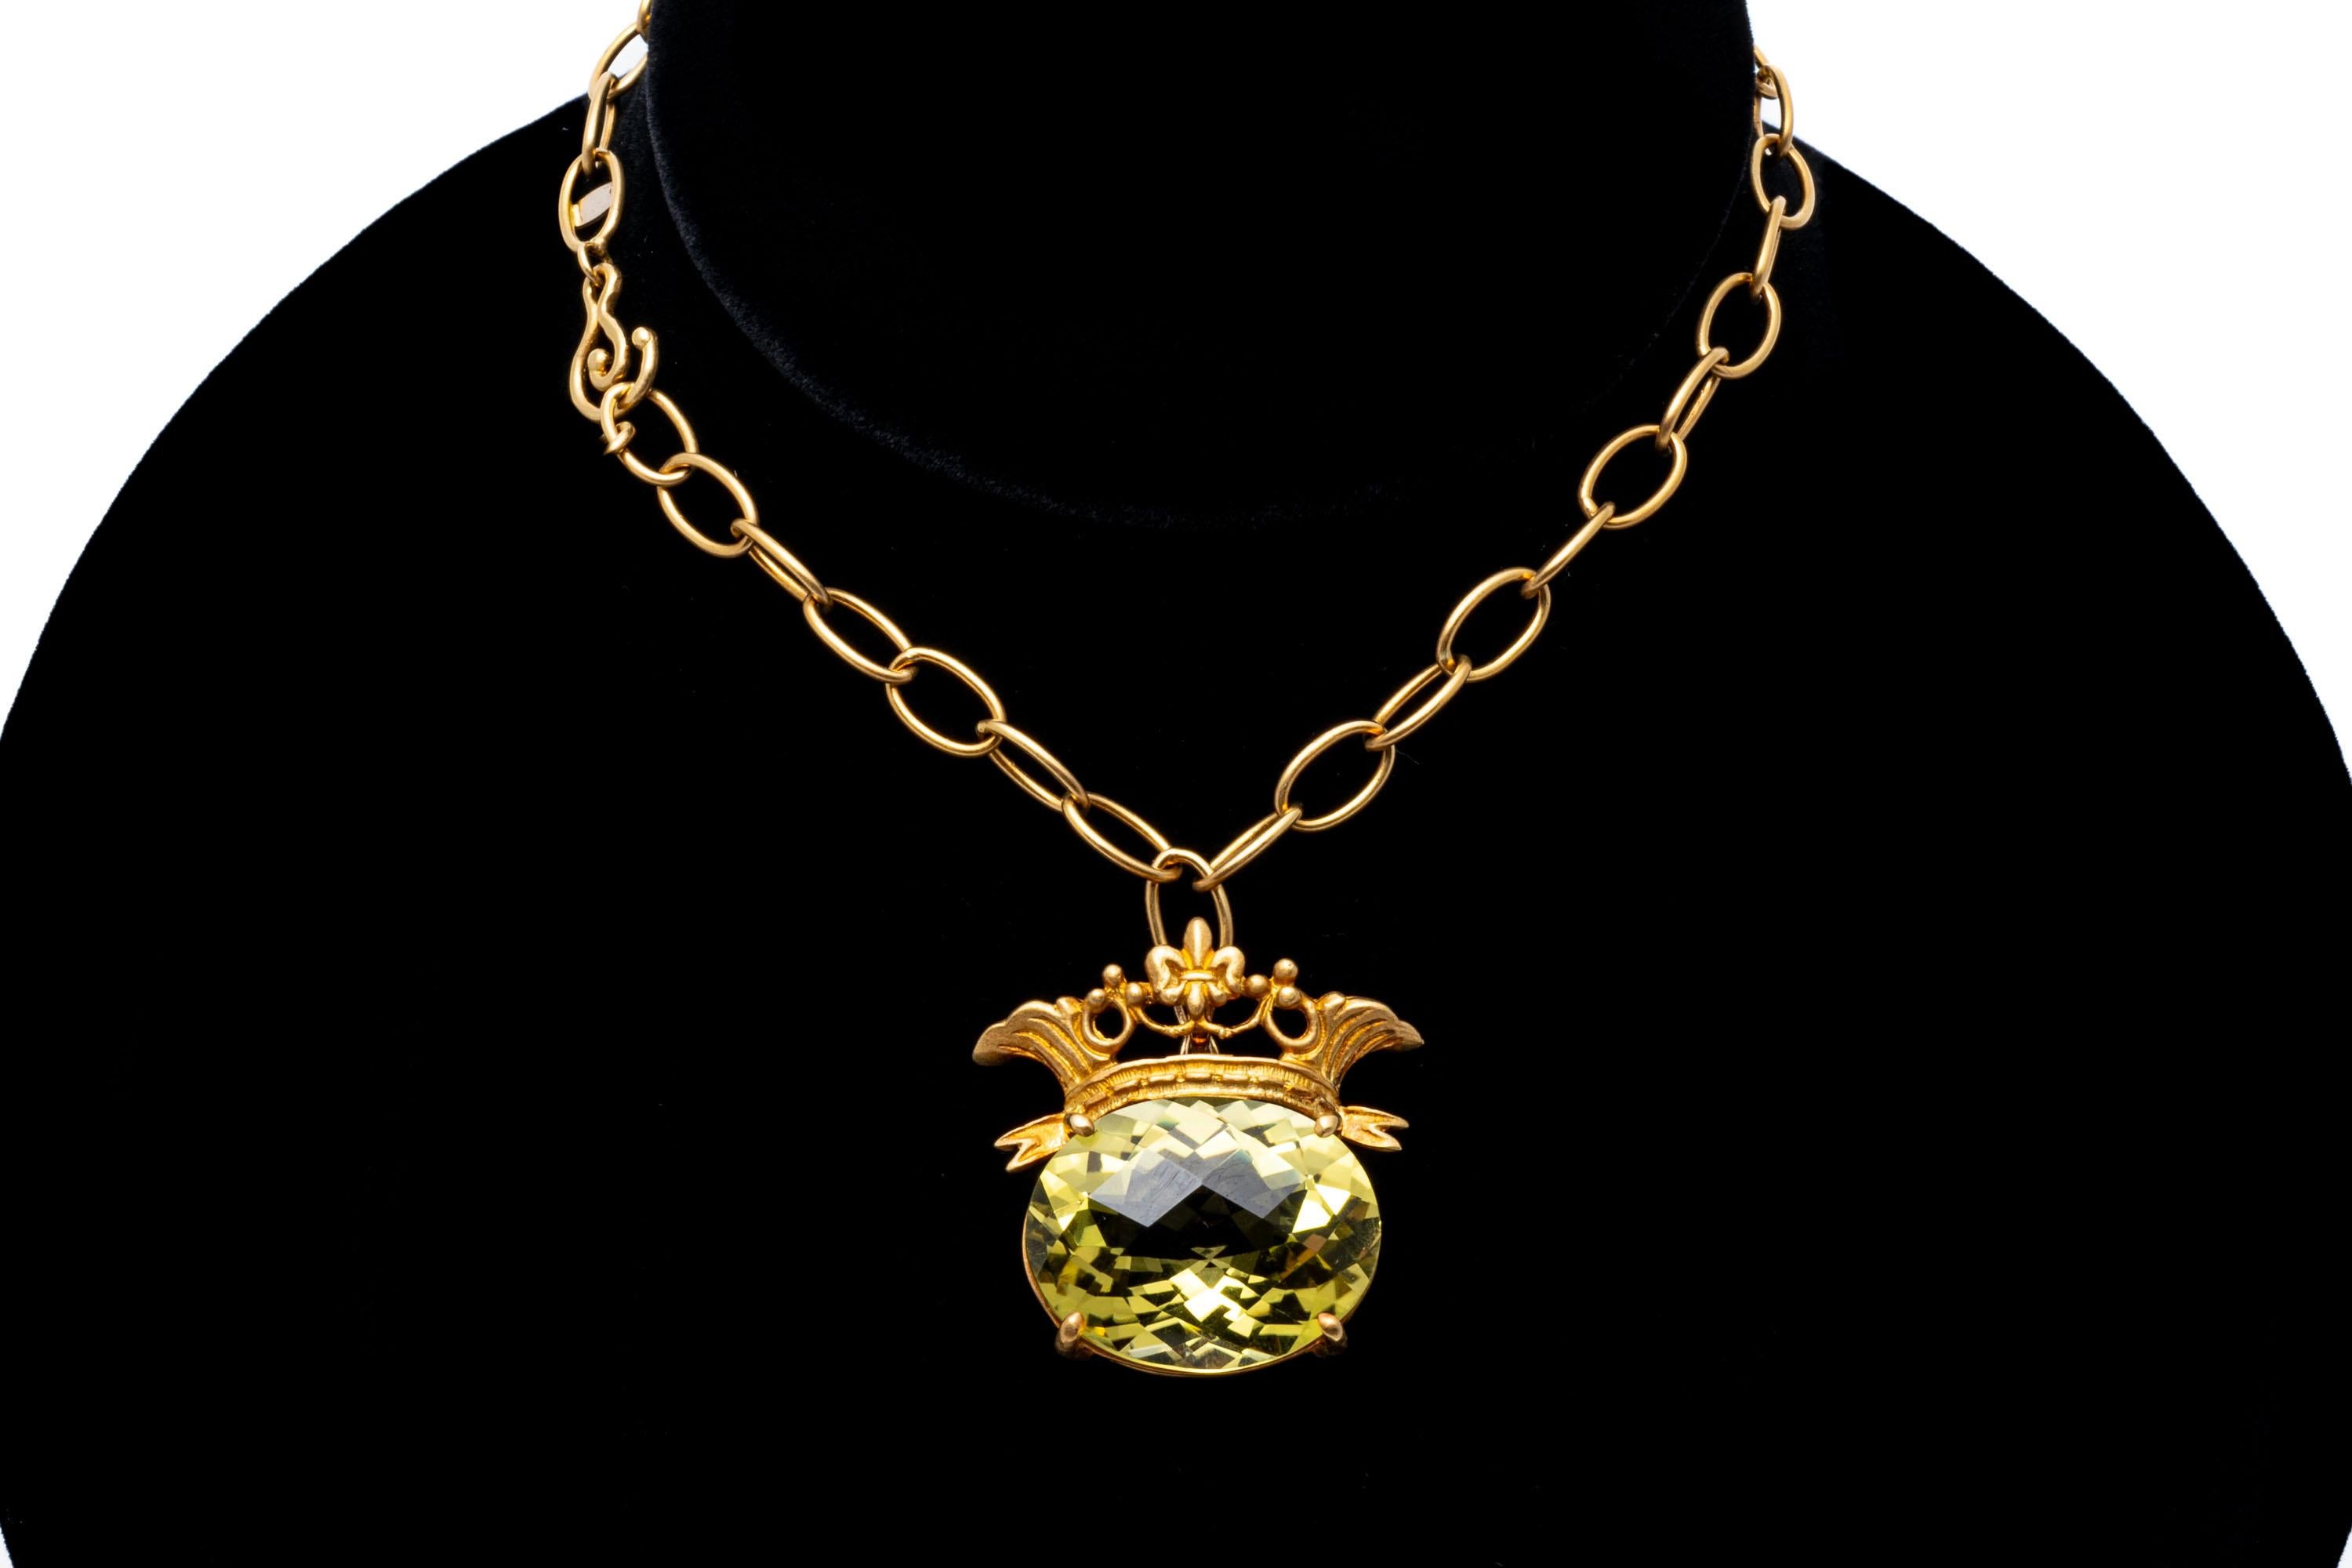 18k and 14k yellow gold necklace. This striking necklace features a matte finished, oval link chain, from which suspends a large, horizontal oval faceted, lemon-lime color citrine, approximately 12.36 CTS, prong set and decorated with a matte